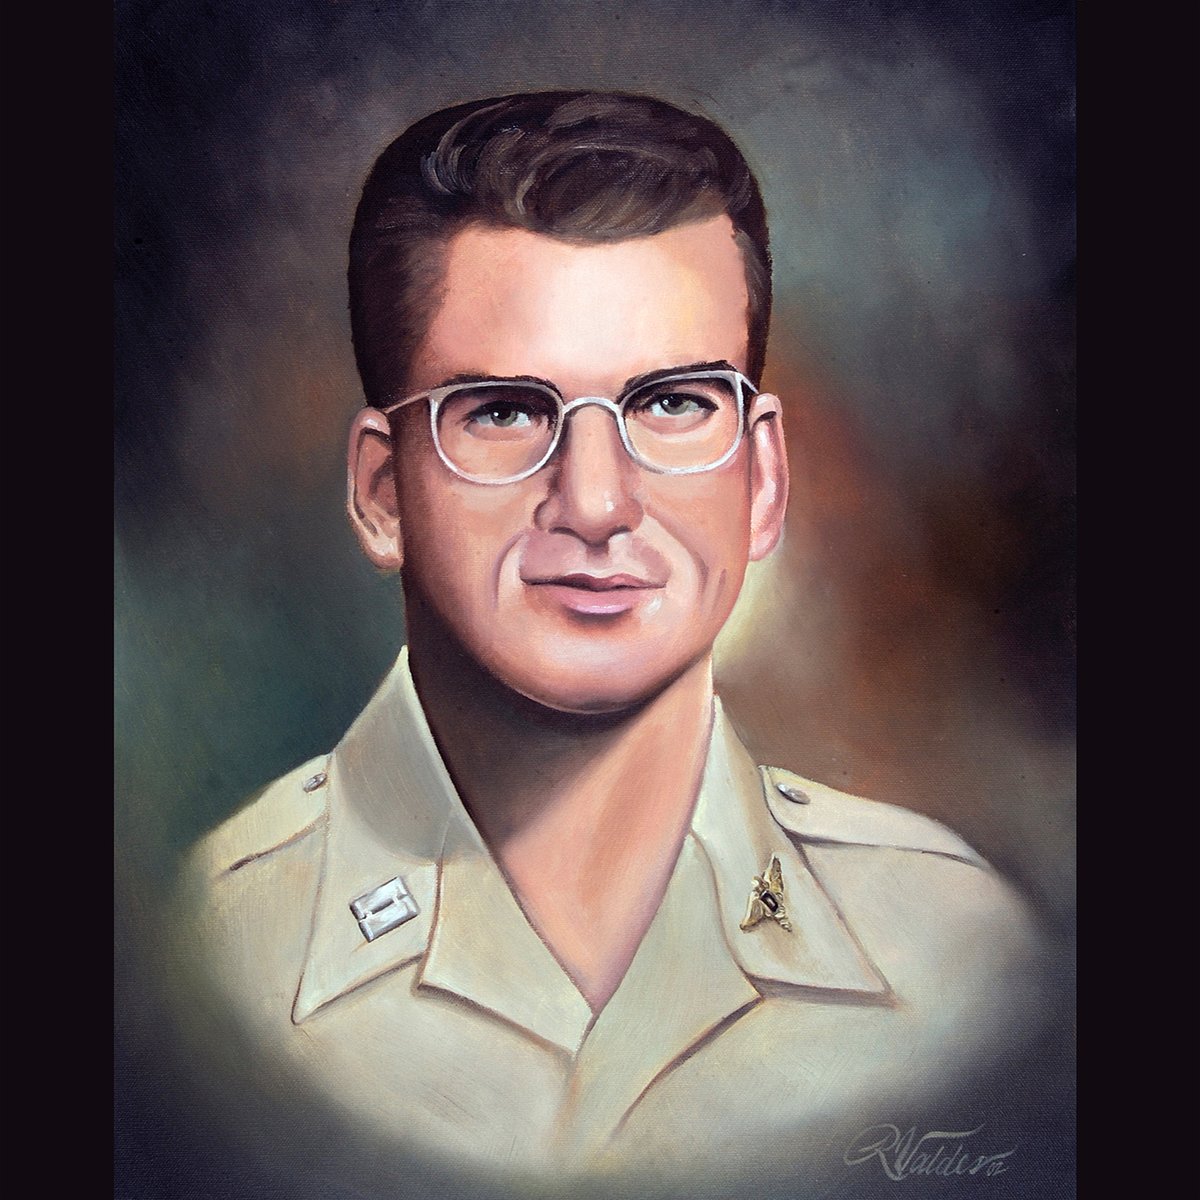 01 MAY 2002: CPT Ben Salomon was awarded the Congressional Medal of Honor on 1 May 2002, approximately 58 years after the heroic actions that earned him such an honor and brought about his death. 

#BenSalomon #MedalOfHonor 
cmohs.org/recipients/ben…